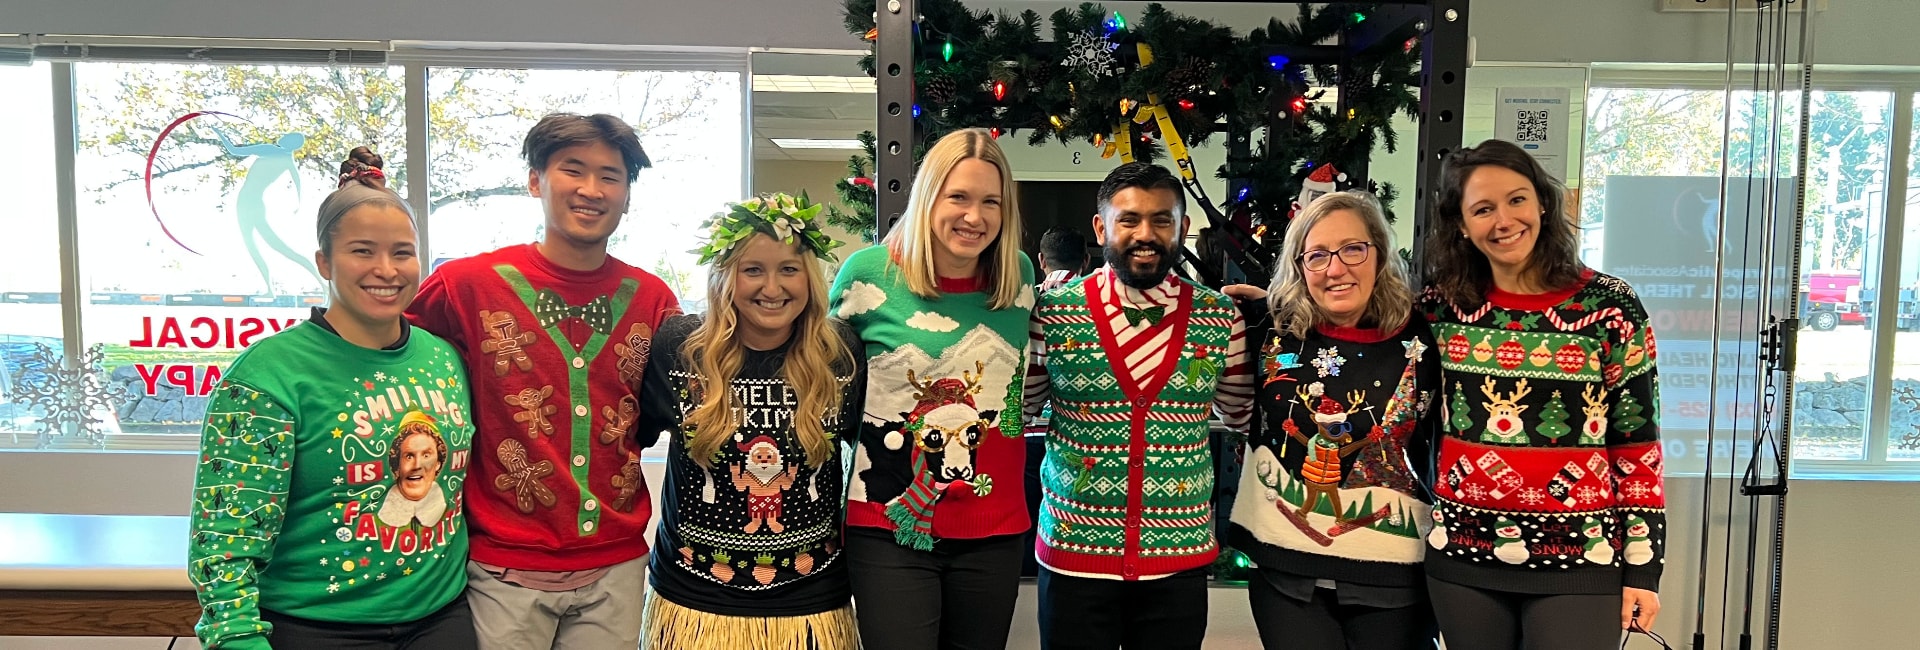 Team of physical therapists celebrate the holidays with festive sweaters.